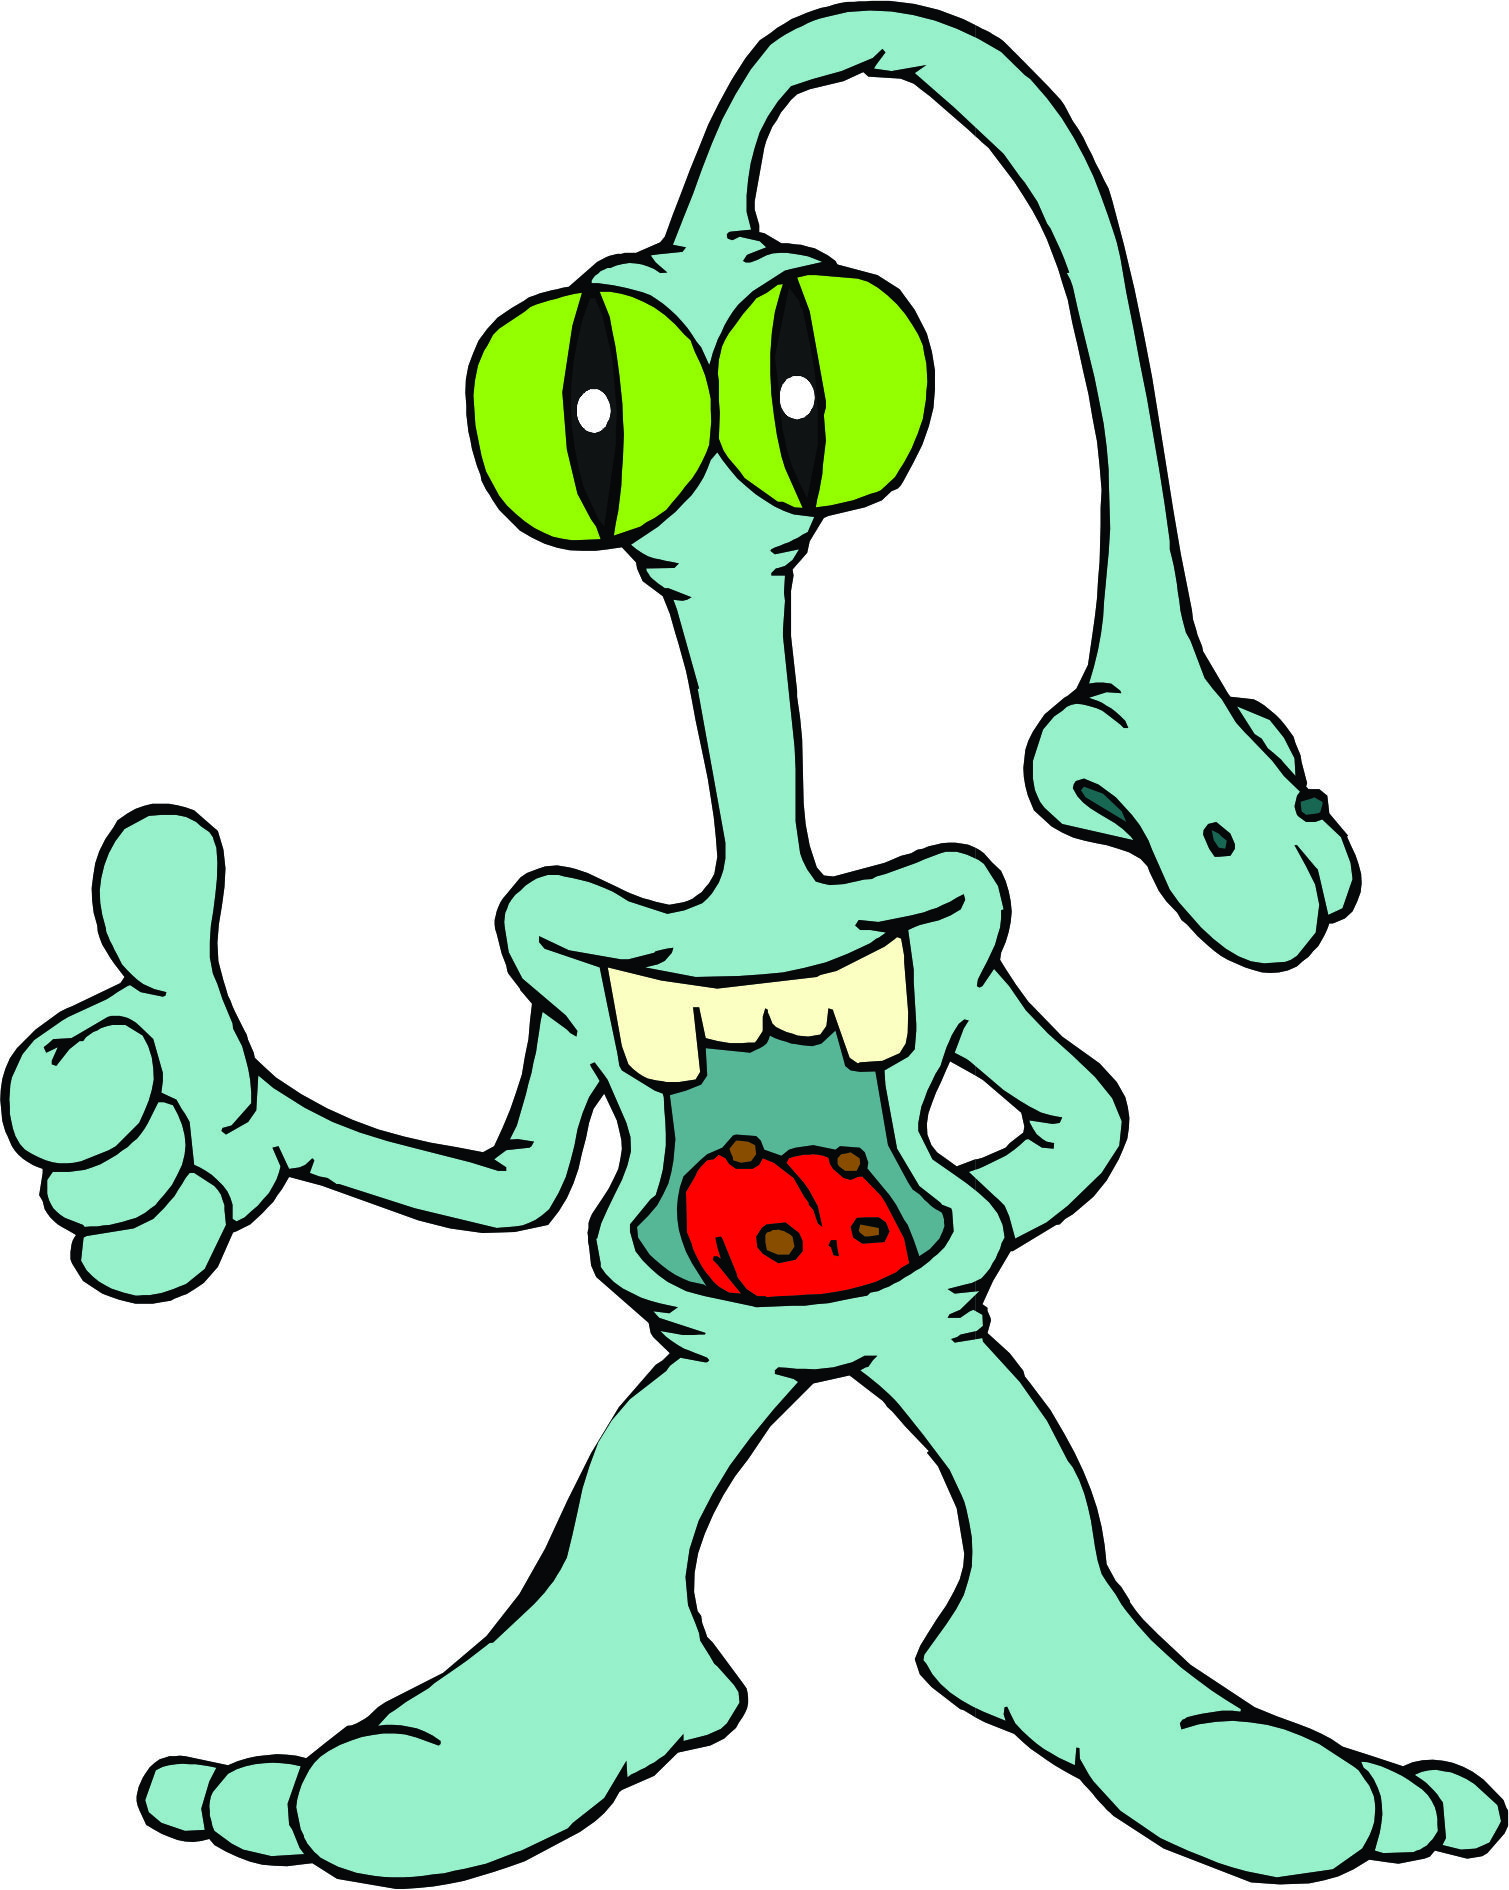 Free Alien Cartoon Pictures, Download Free Clip Art, Free.